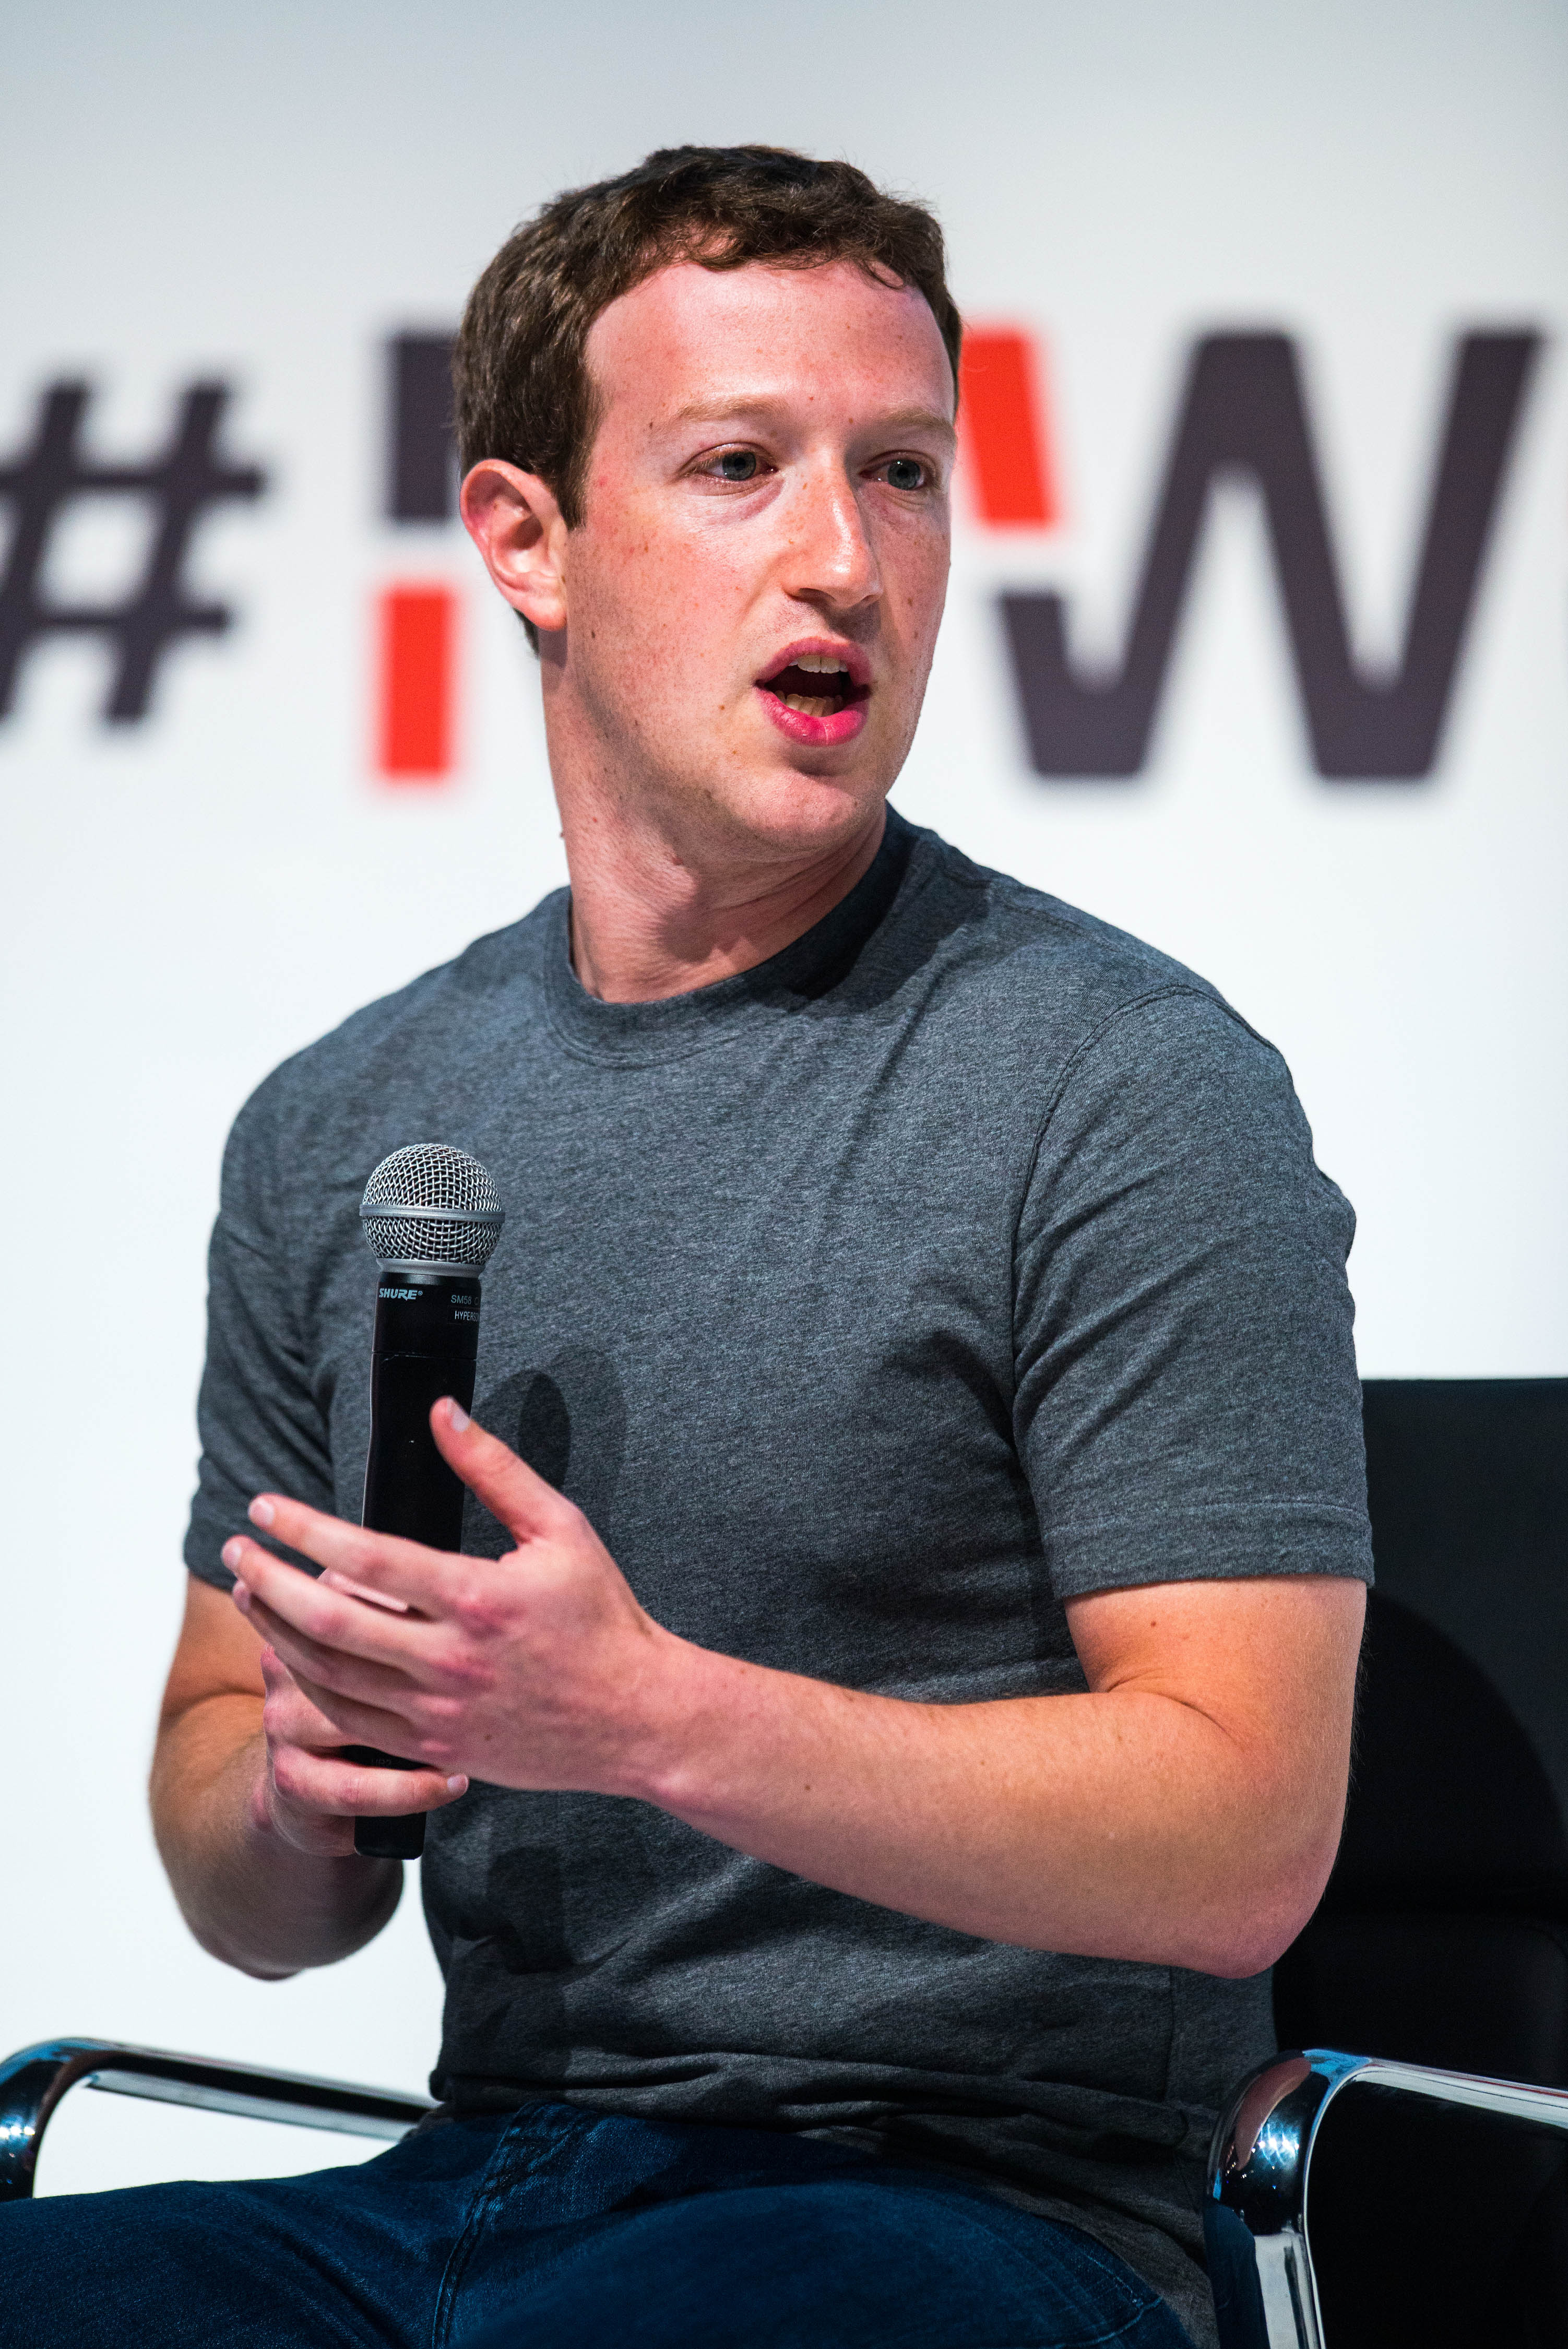 Mark Zuckerberg’s Net Worth 5 Fast Facts You Need to Know